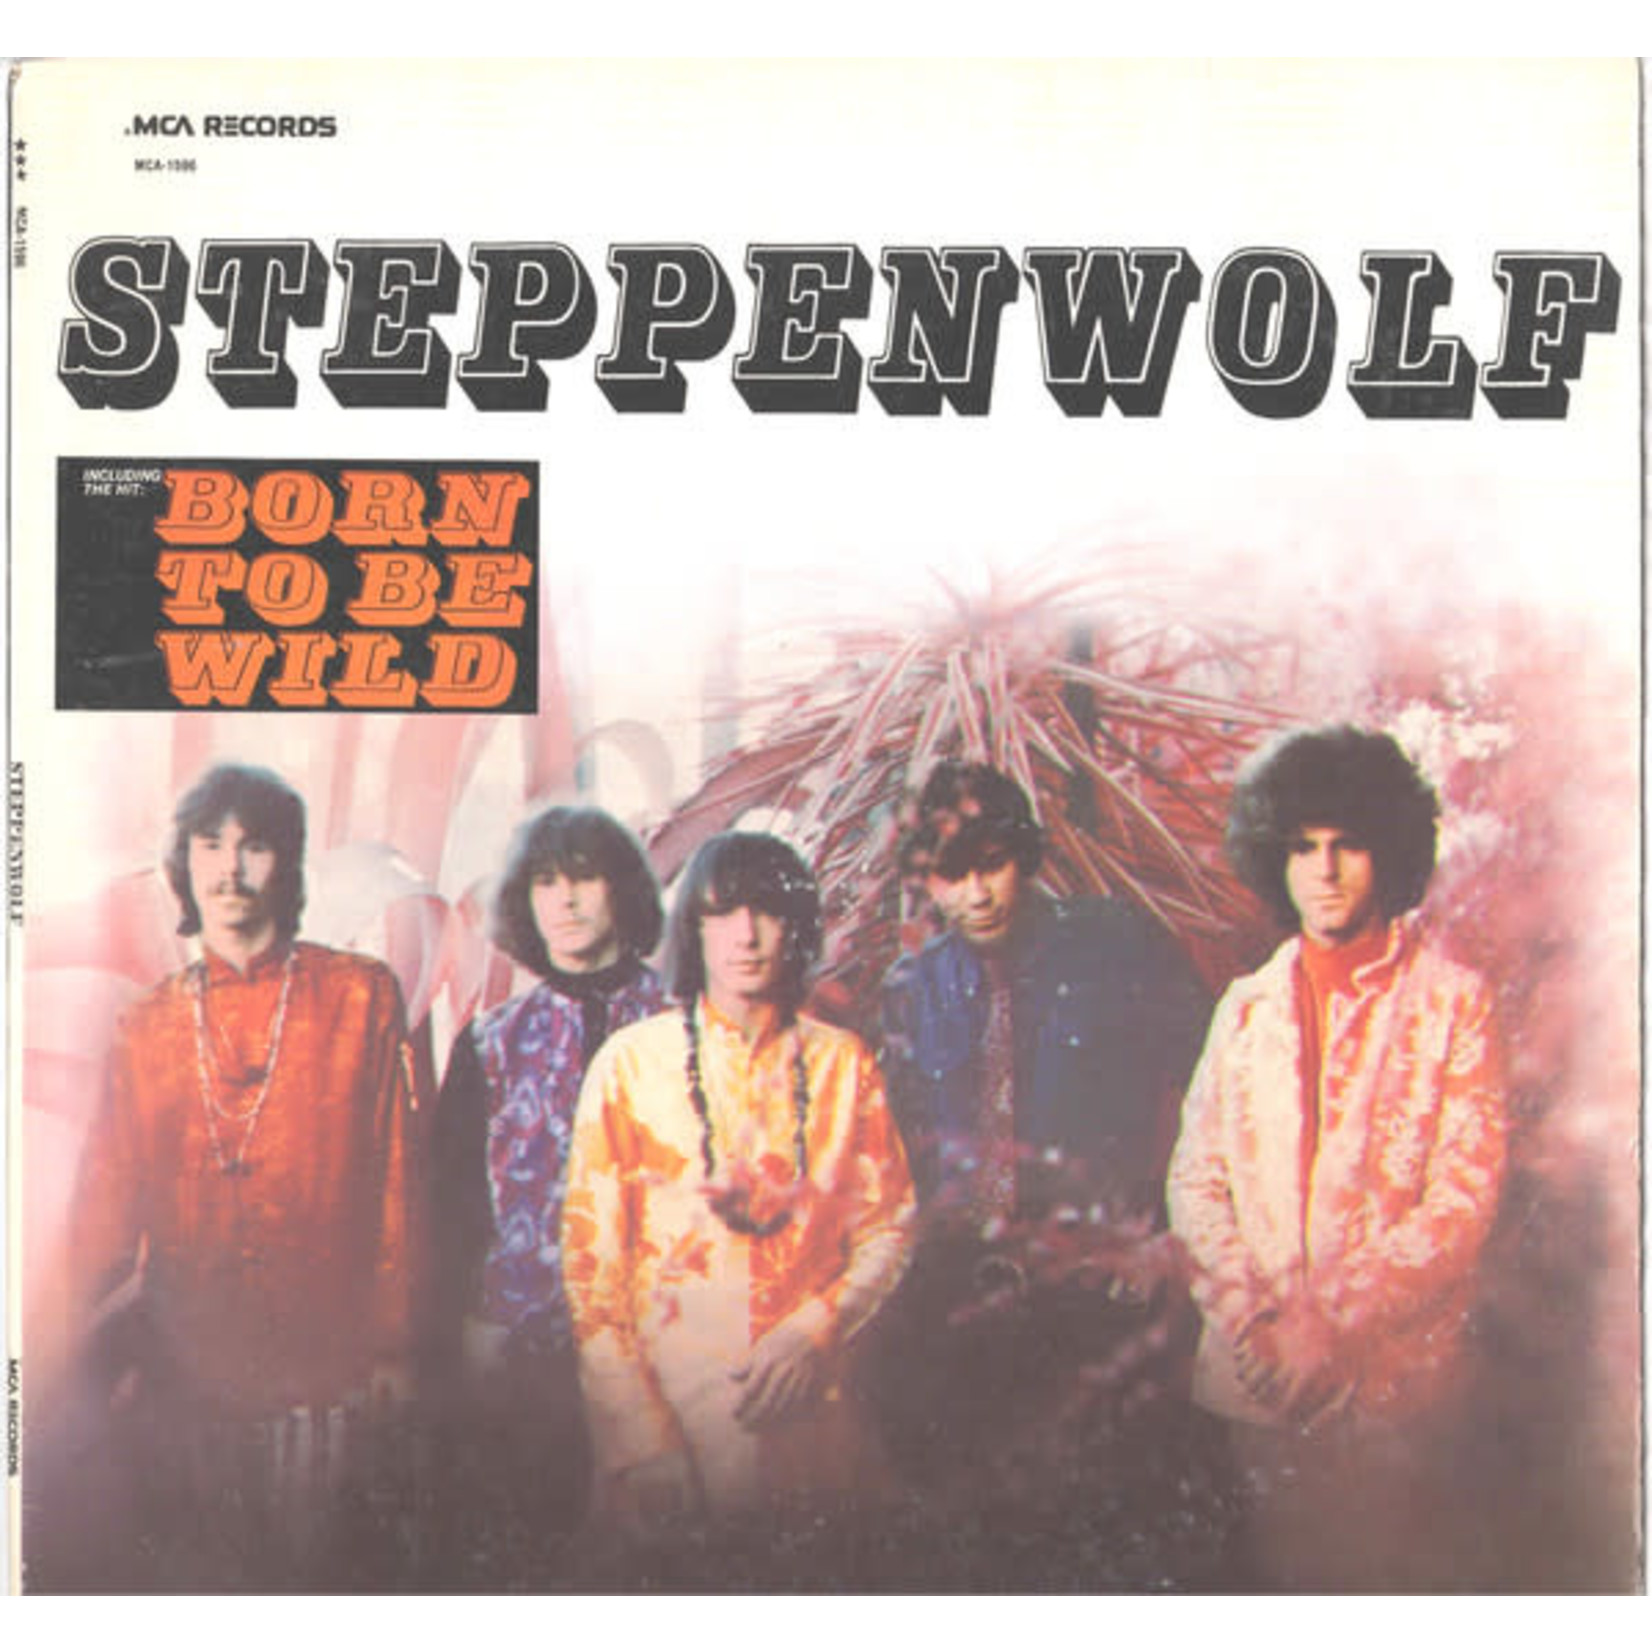 [Vintage] Steppenwolf - self-titled ('Born to be Wild')